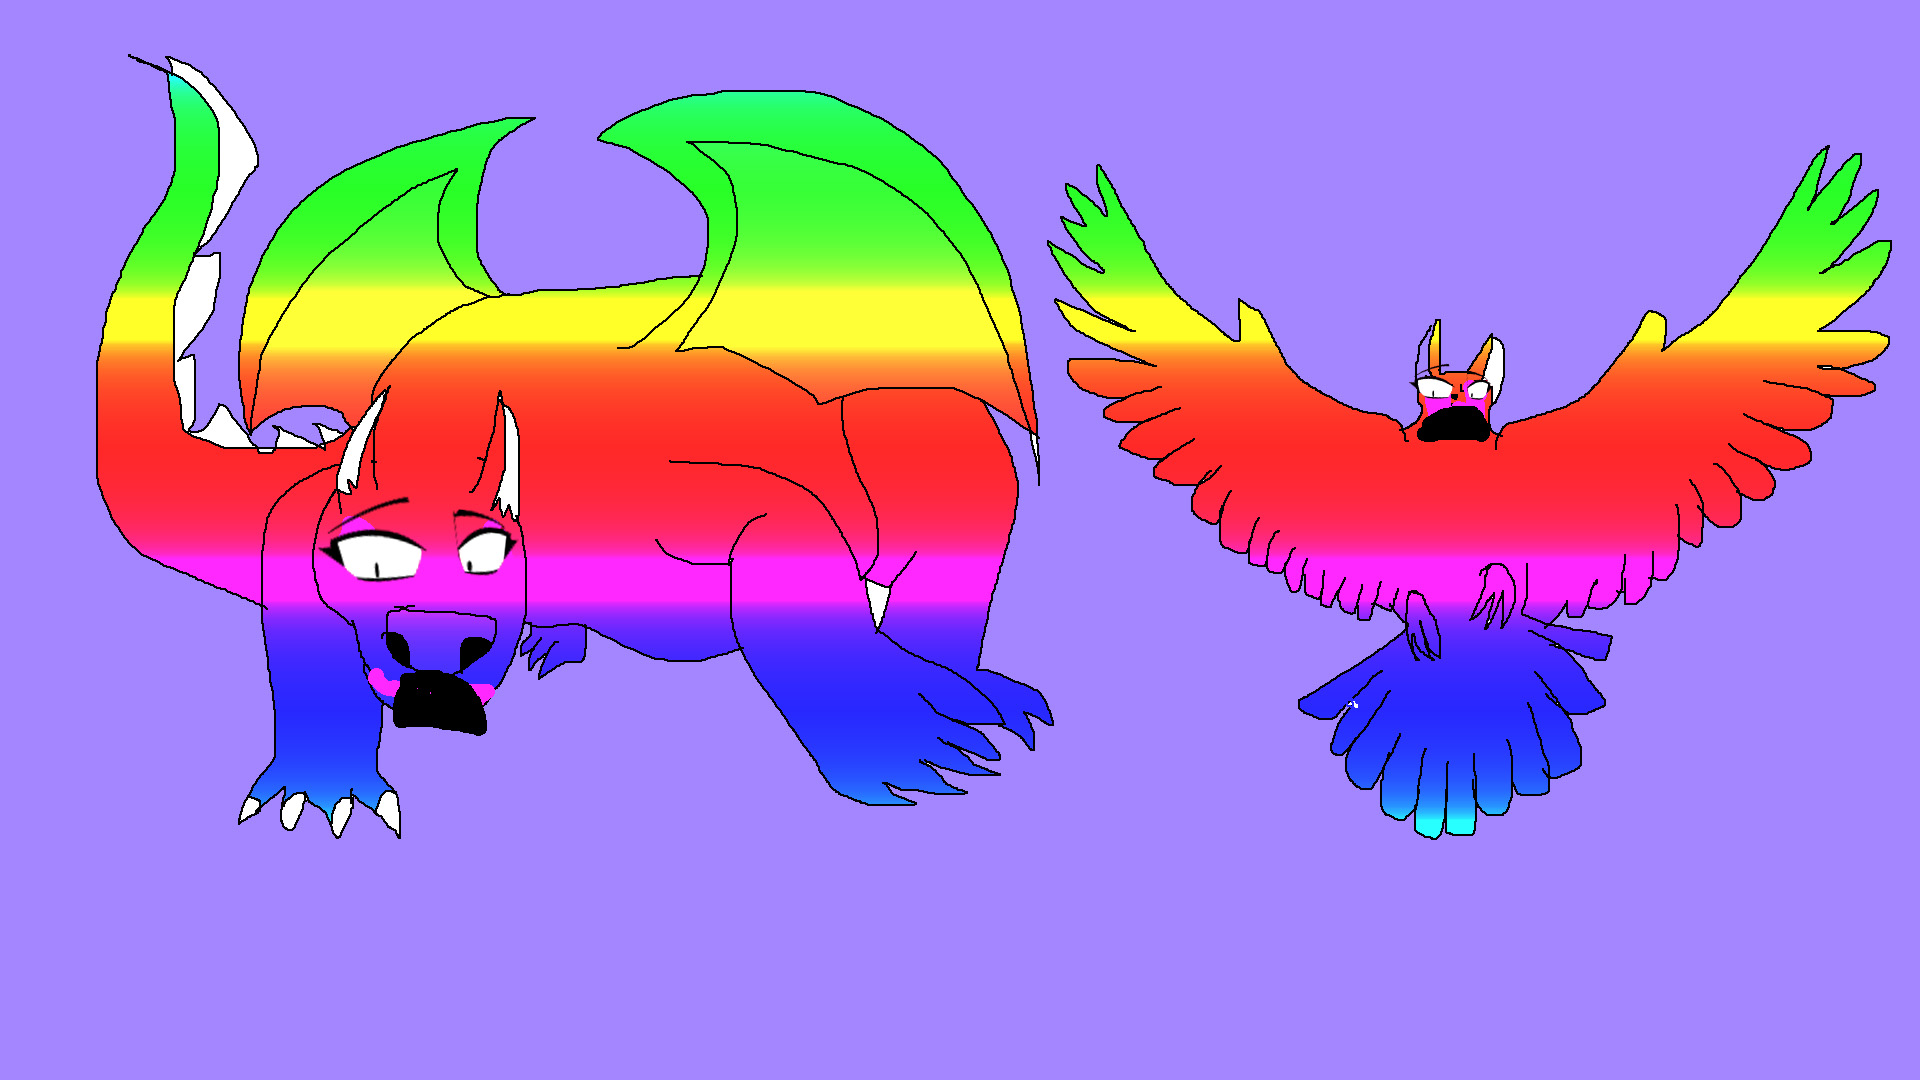 Zburator with Komodo and Falcon is defeated by Light Rainbow Attack by Rainbow-Dash-Rockz